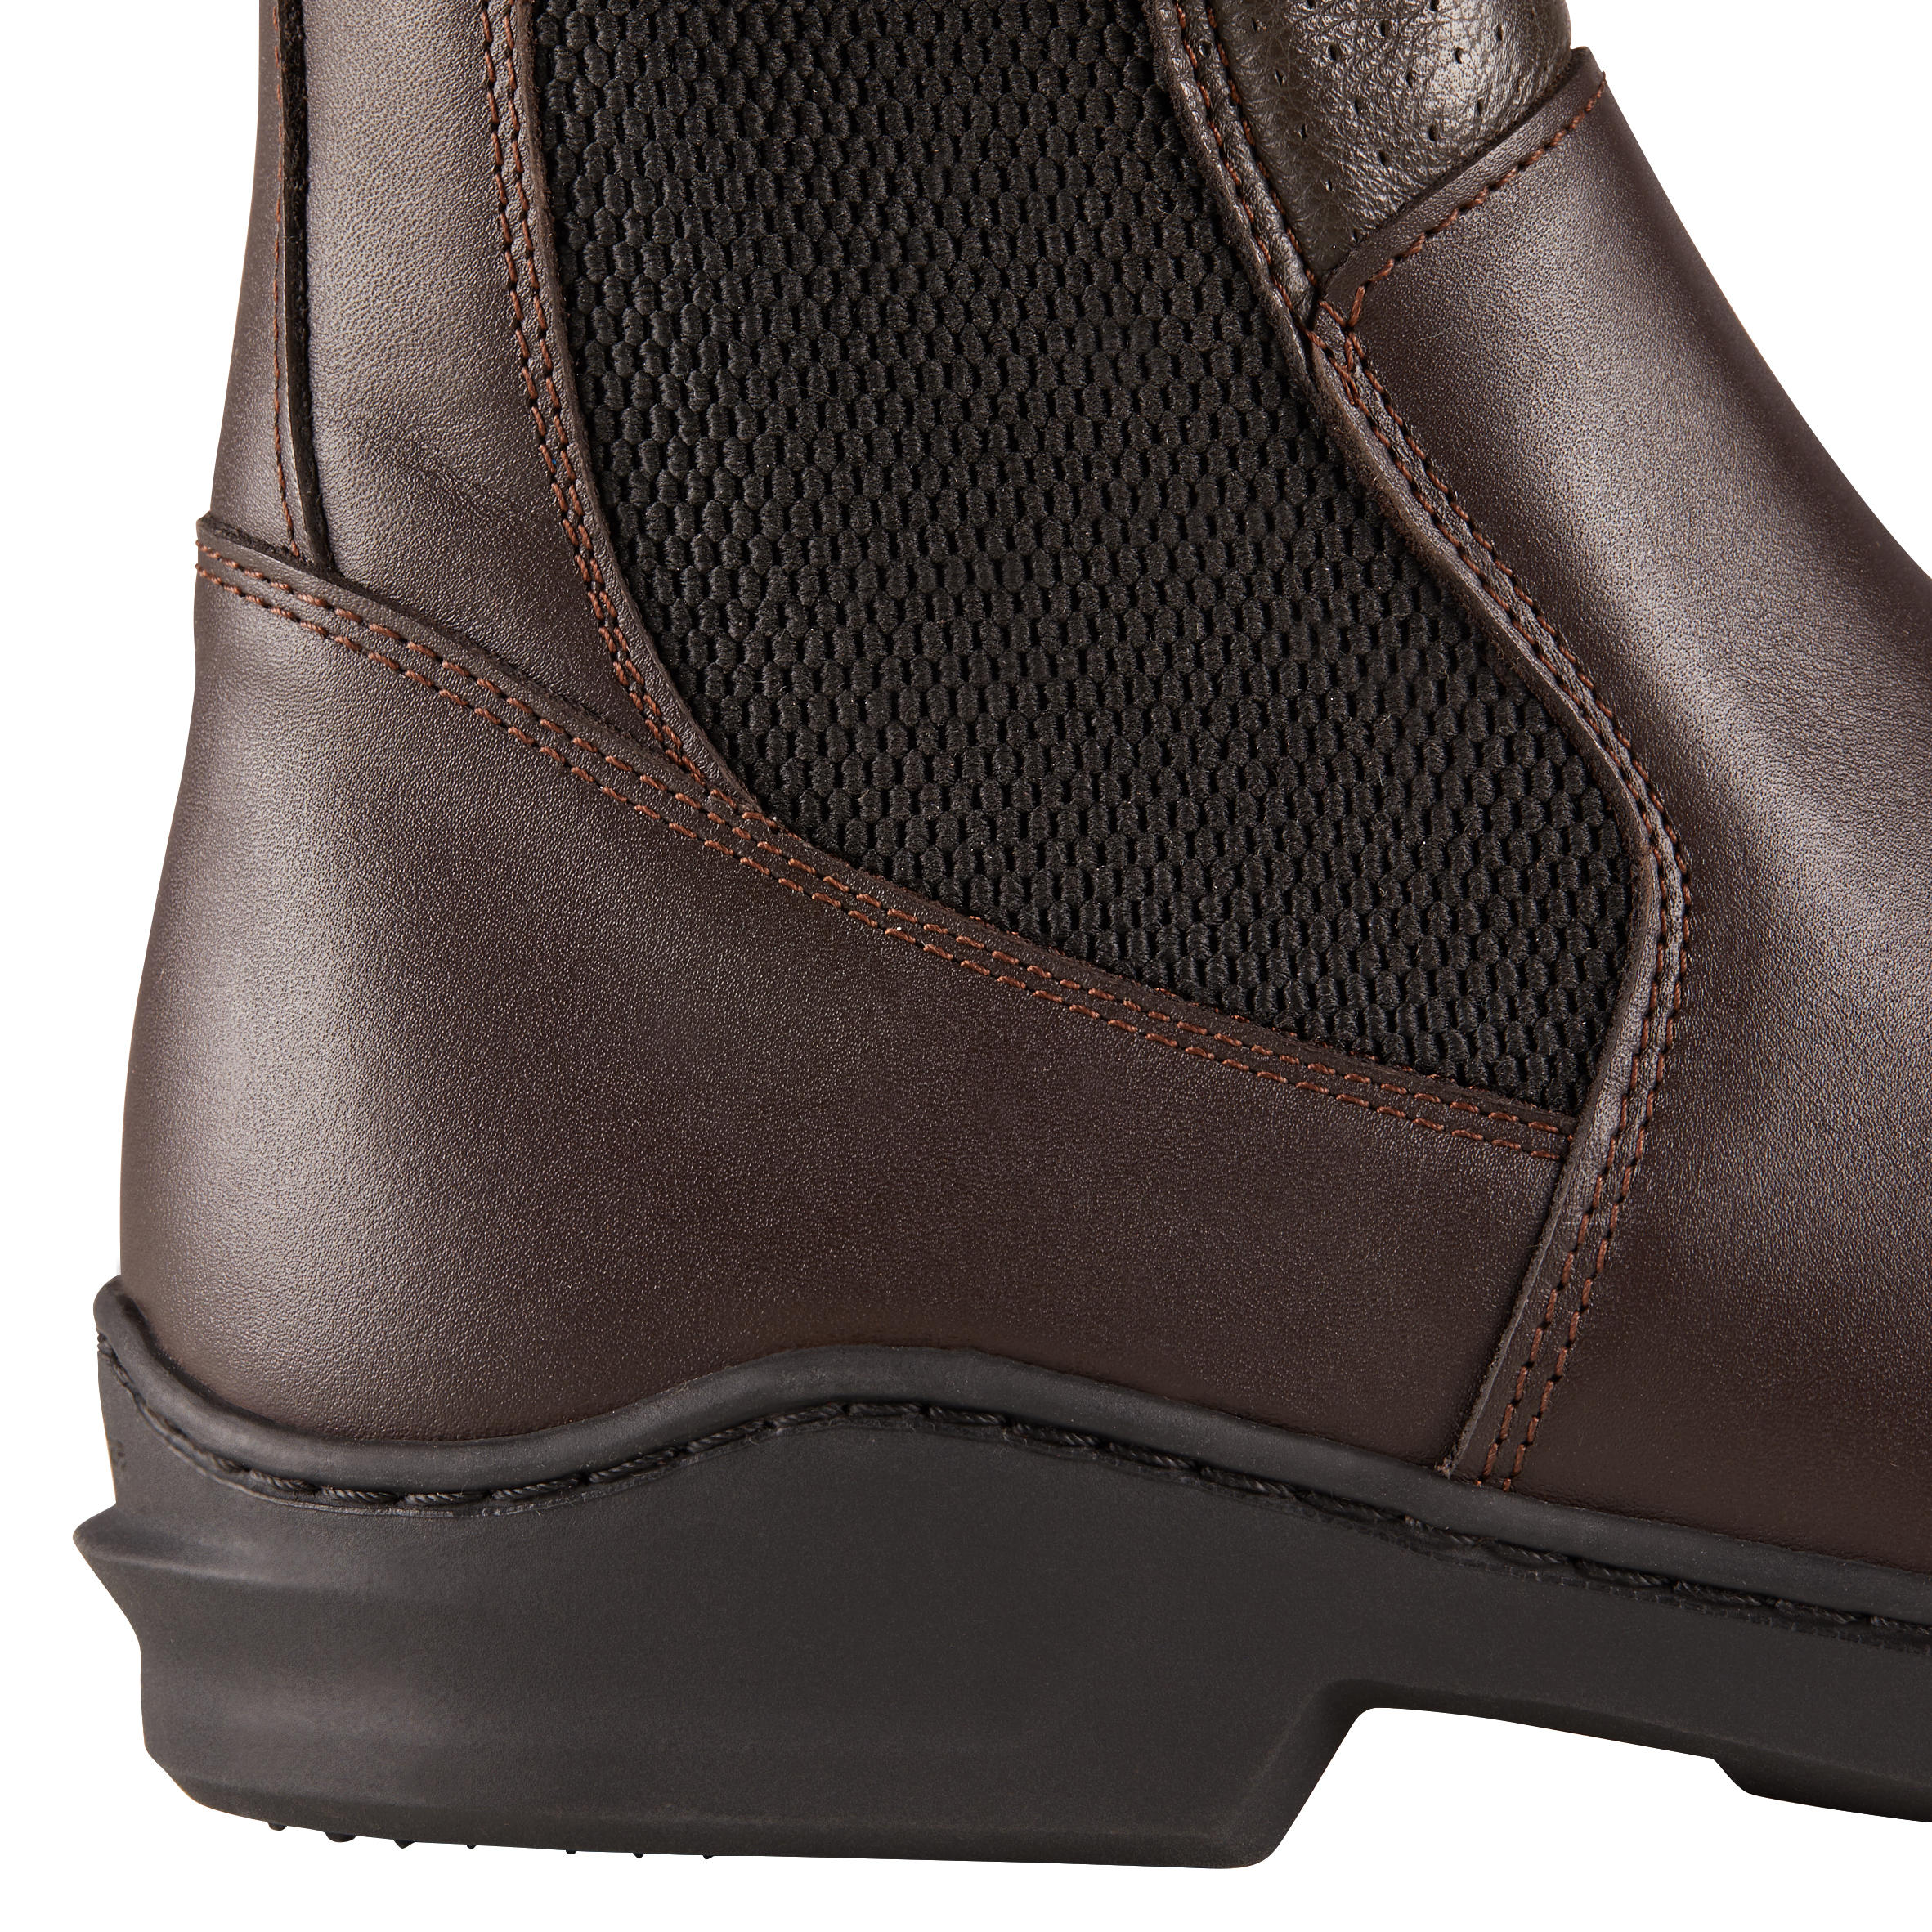 560 Adult Horse Riding Leather Jodhpur Boots - Brown 10/10